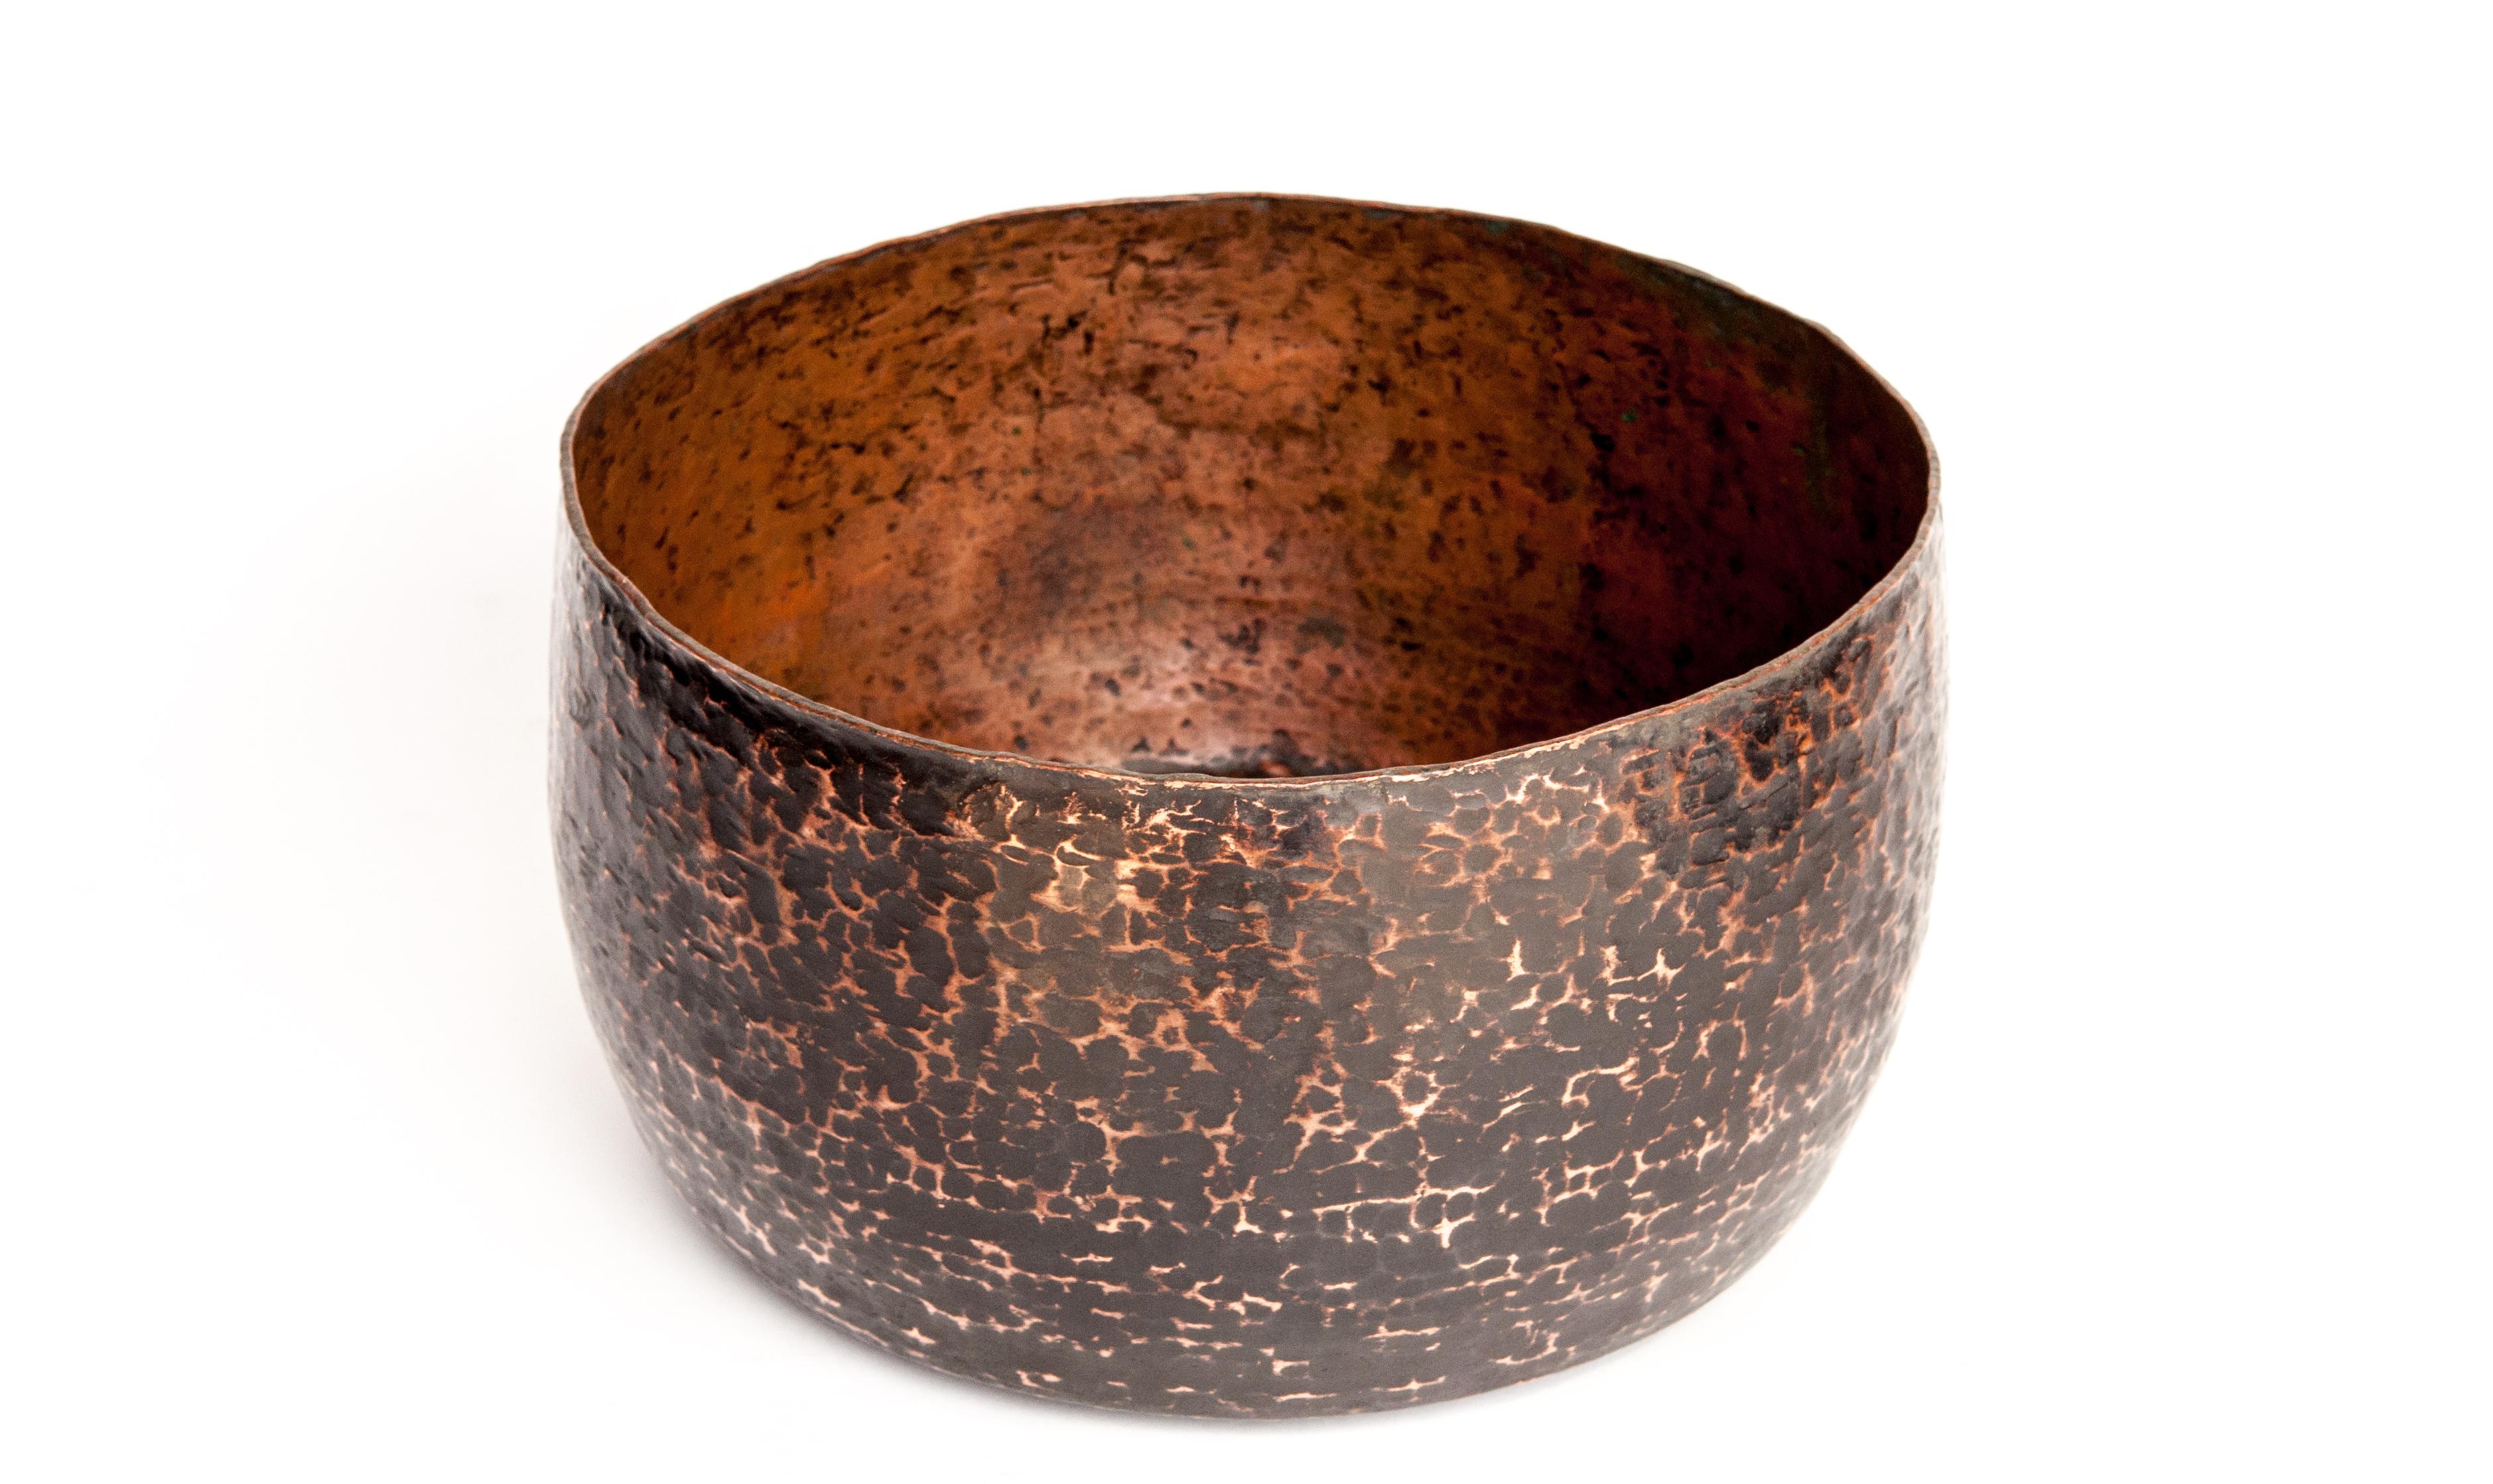 Vintage copper bowl from the Nepal Himal. Mid-20th century. 12.75 inch diameter.
Hand hammered copper bowl from the mountains of rural Nepal.
Dimensions: 12.75